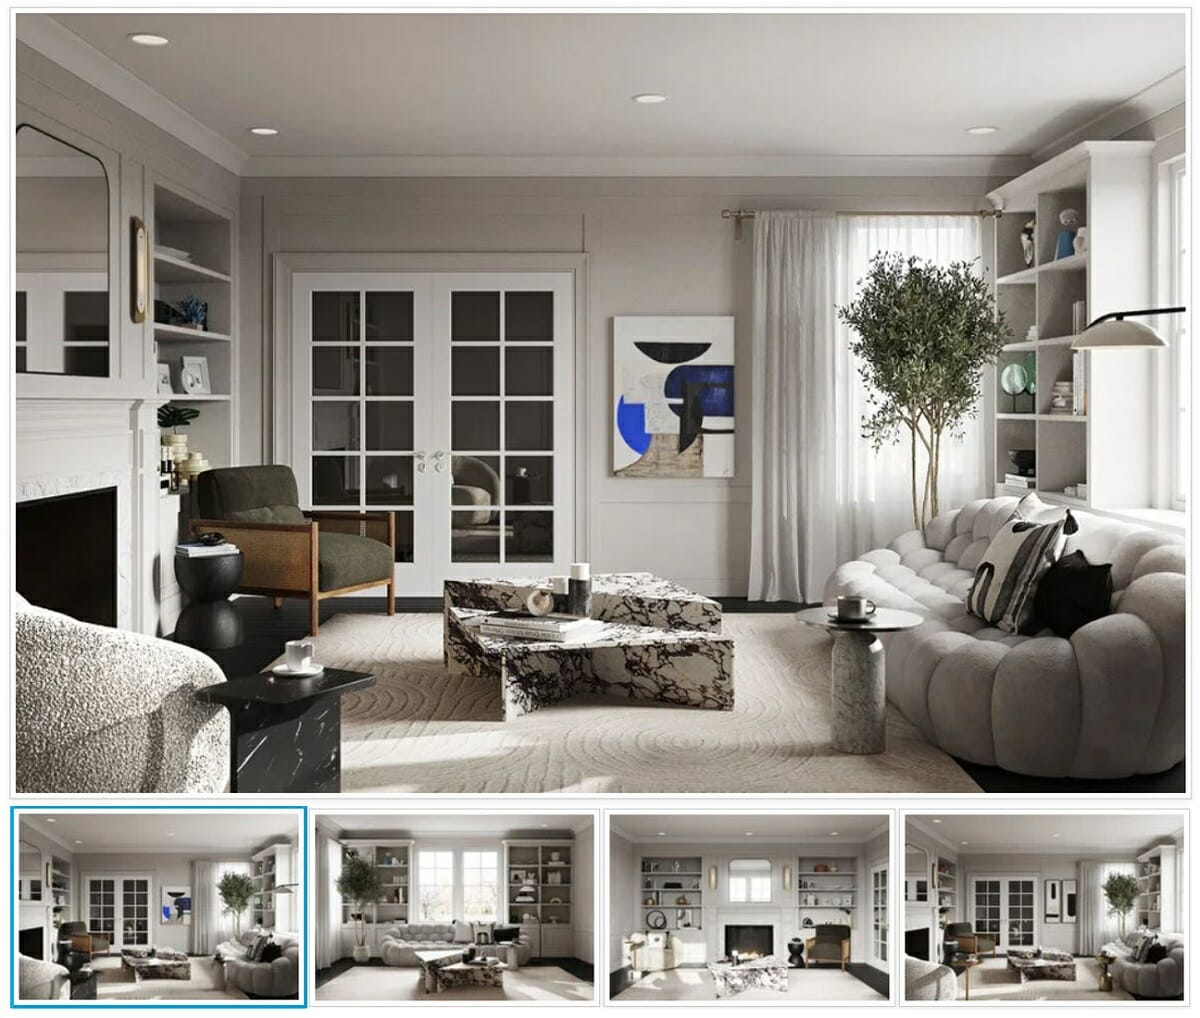 Room result by one of the top interior designers in NYC - Marine H